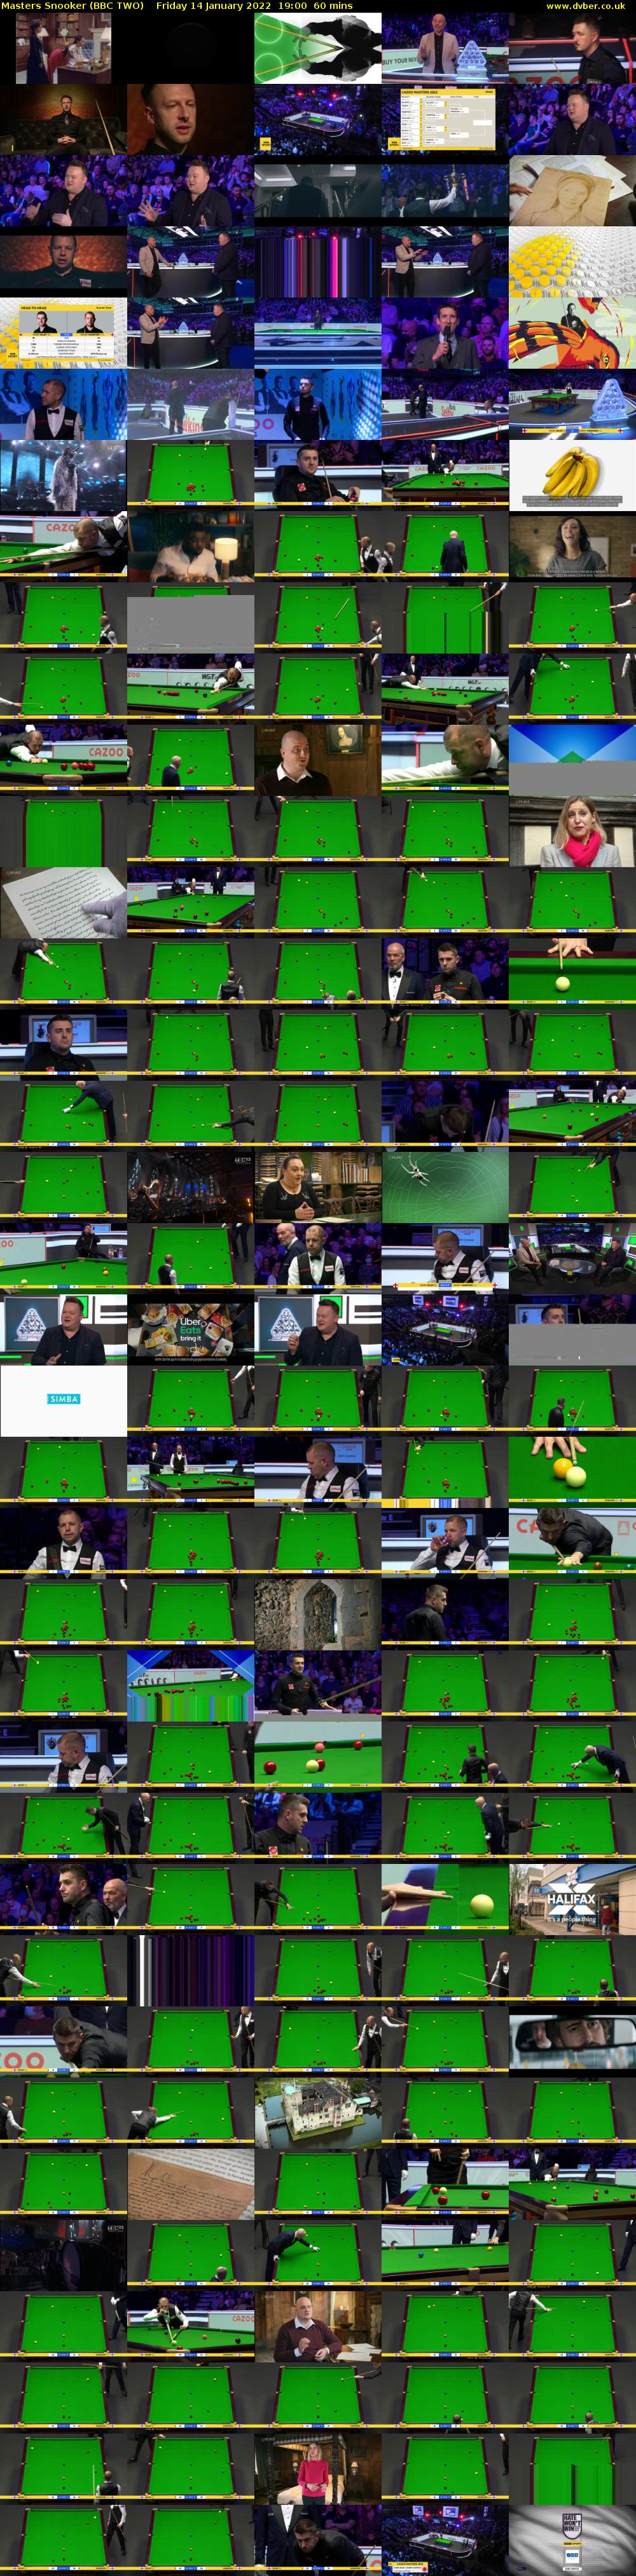 Masters Snooker (BBC TWO) Friday 14 January 2022 19:00 - 20:00